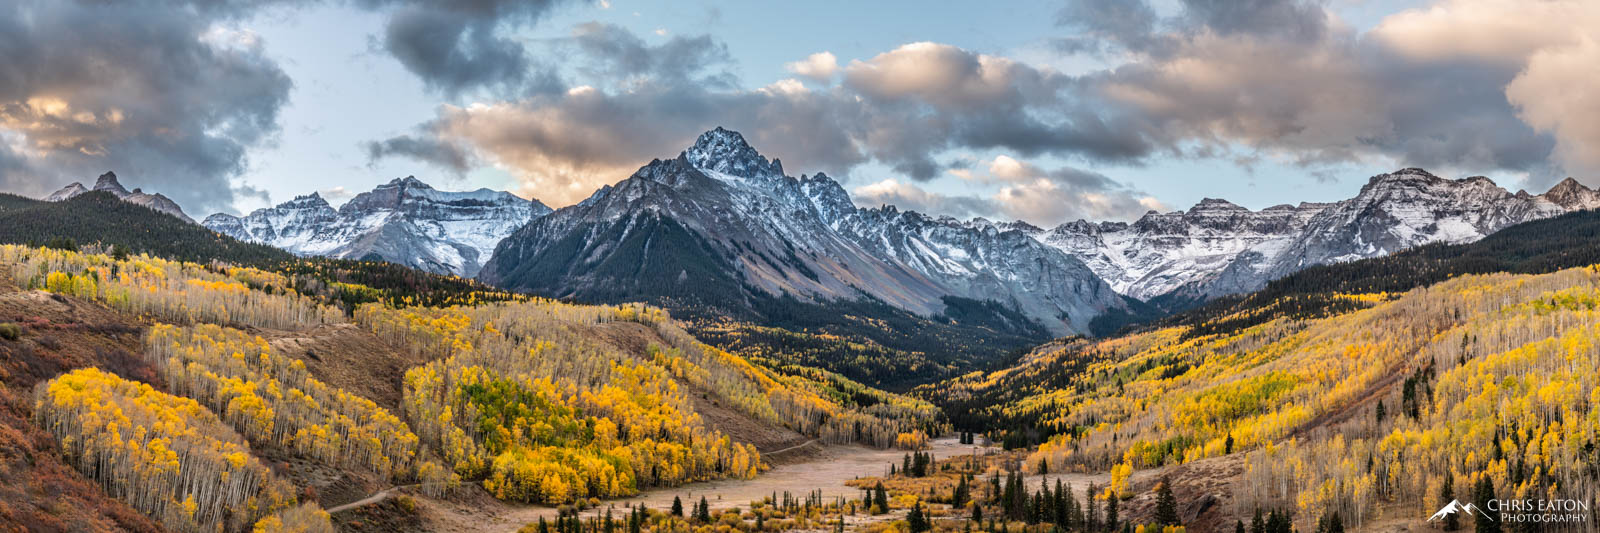 Mt. Sneffels, one of Colorado’s 14ers, rises sharply above a valley in its foothills. Every fall, the valley floor is surrounded...